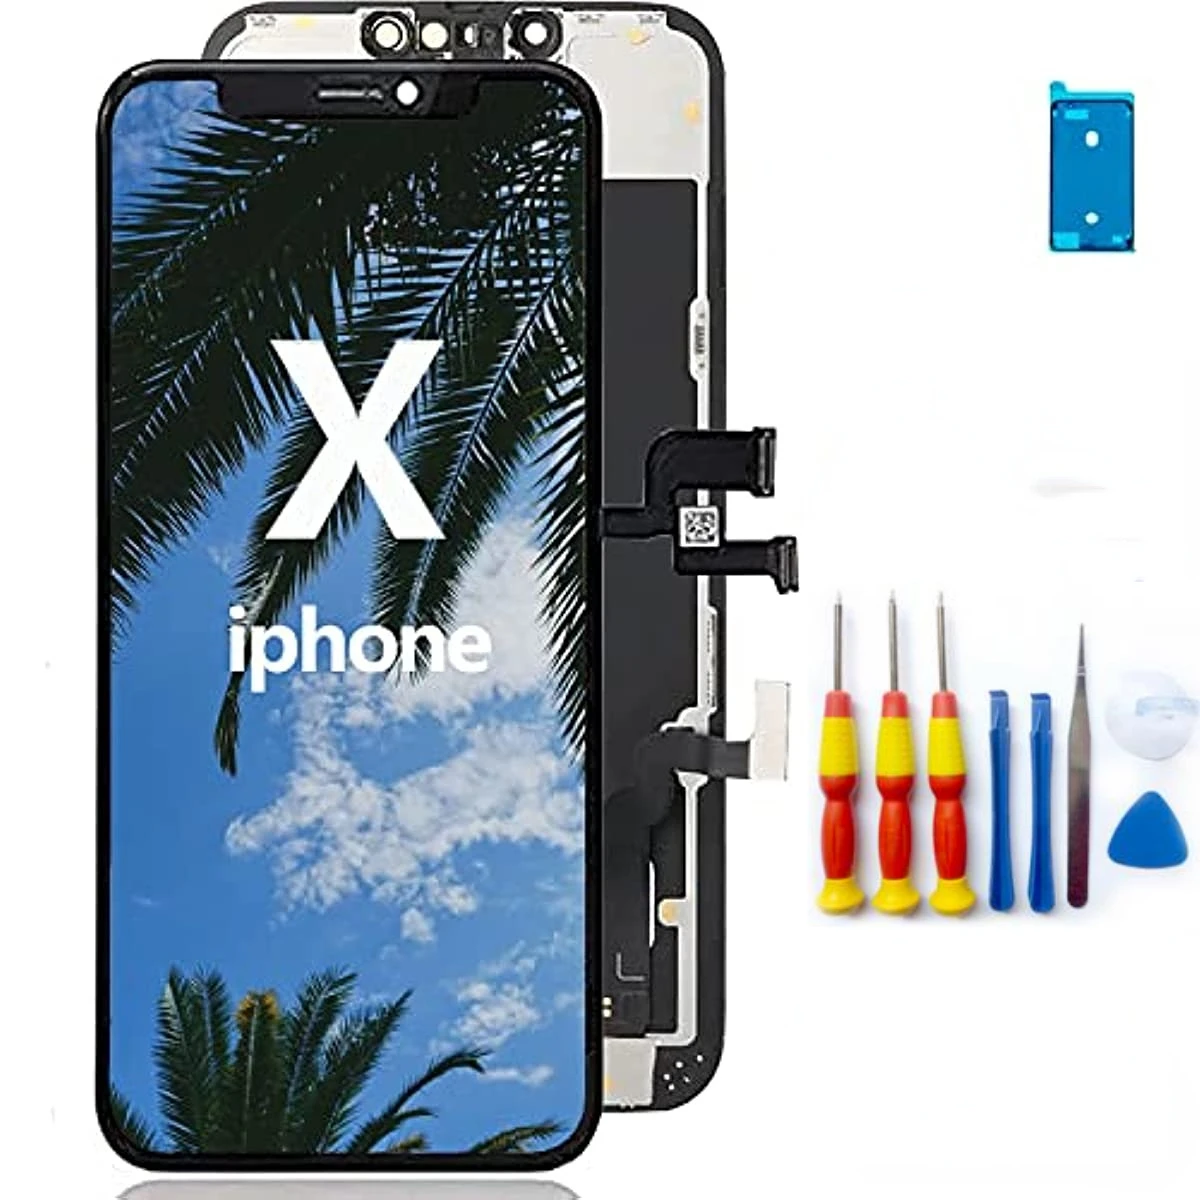 

Screen Replacement for iPhone X A1865 A1901 A1902 5.8 inch iPhone X LCD Display Touch Screen Digitizer Assembly with Repair Tool